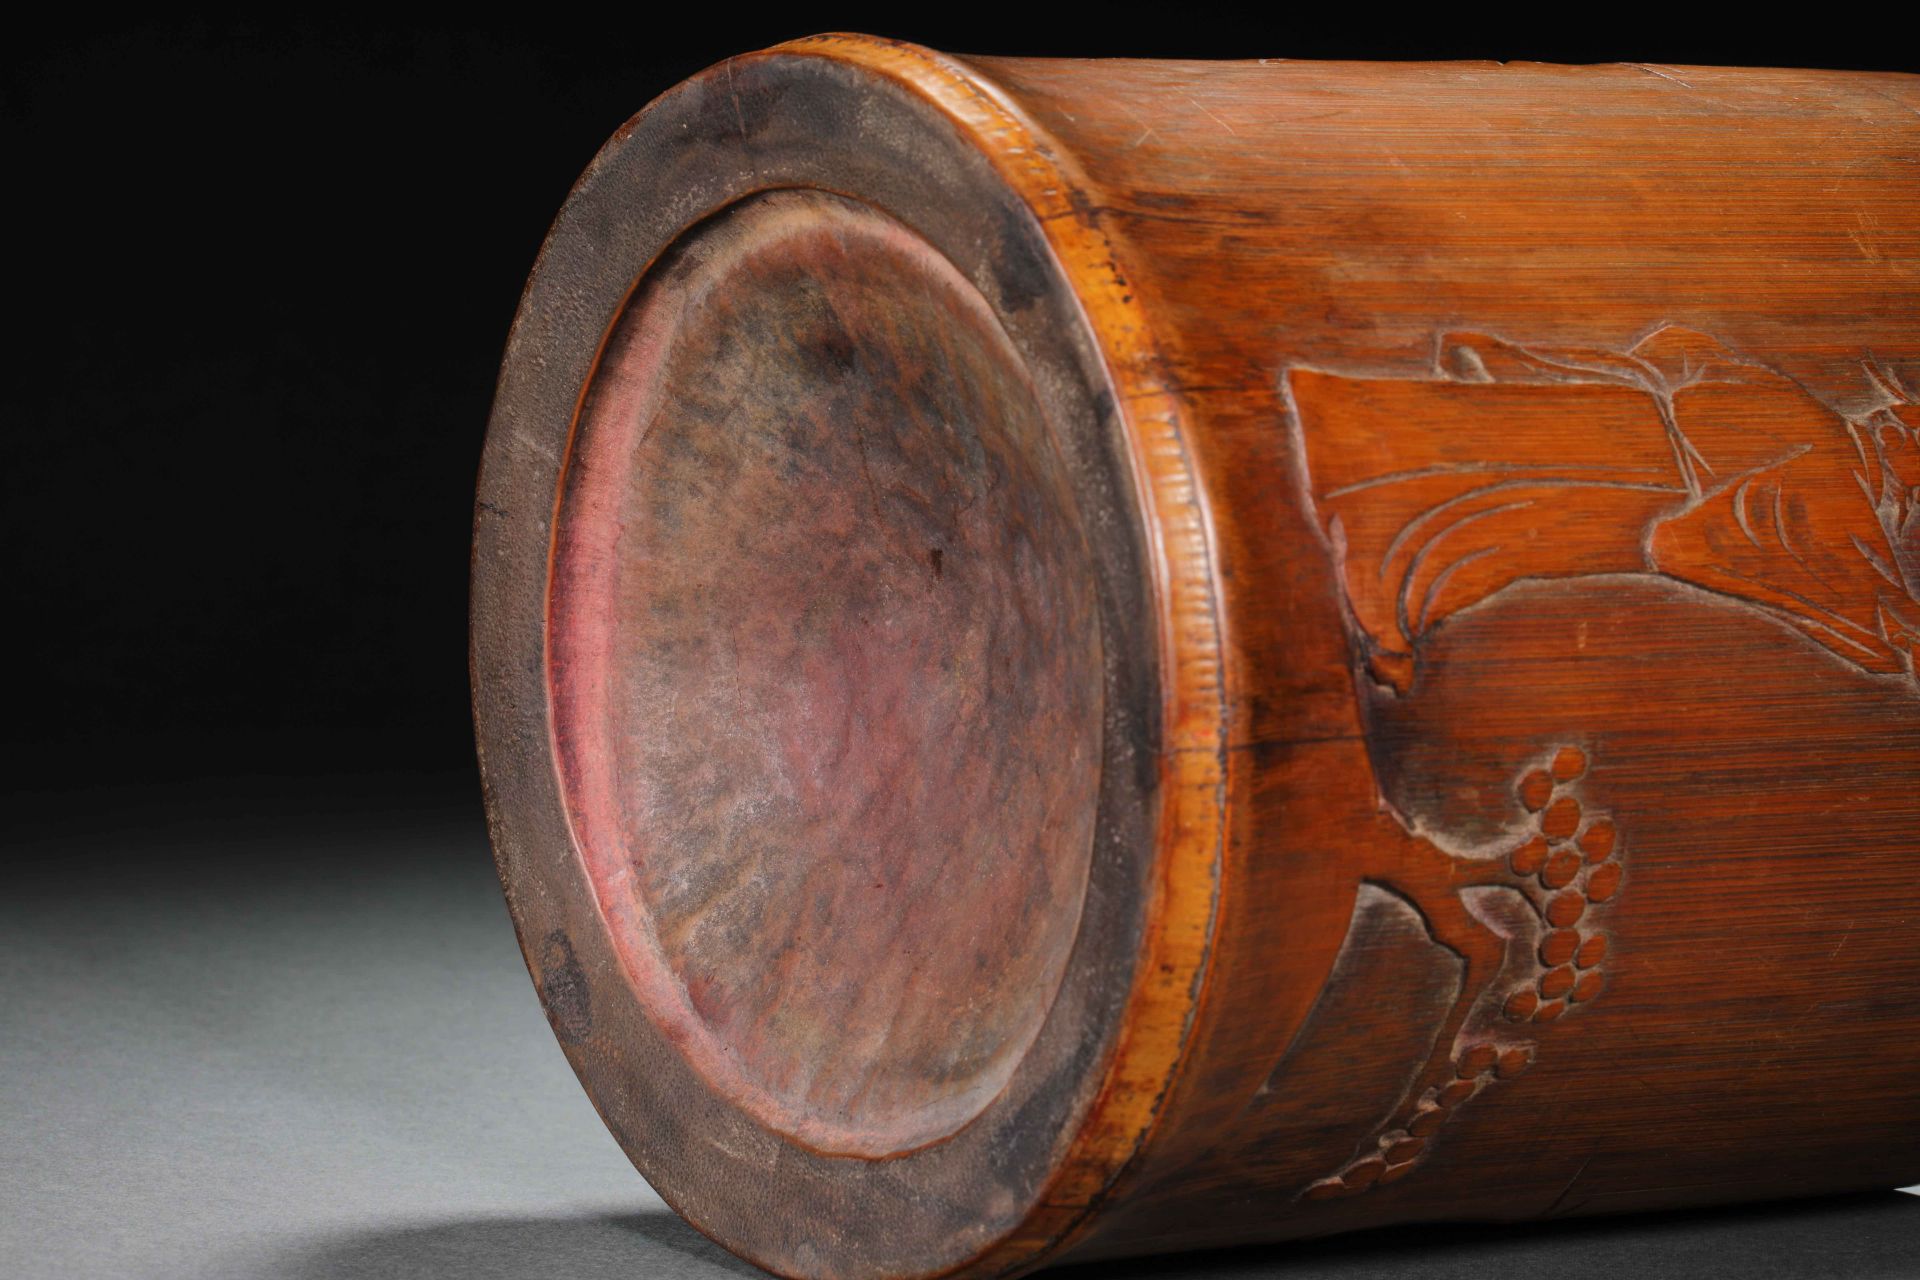 Qing dynasty bamboo pen holder - Image 11 of 11